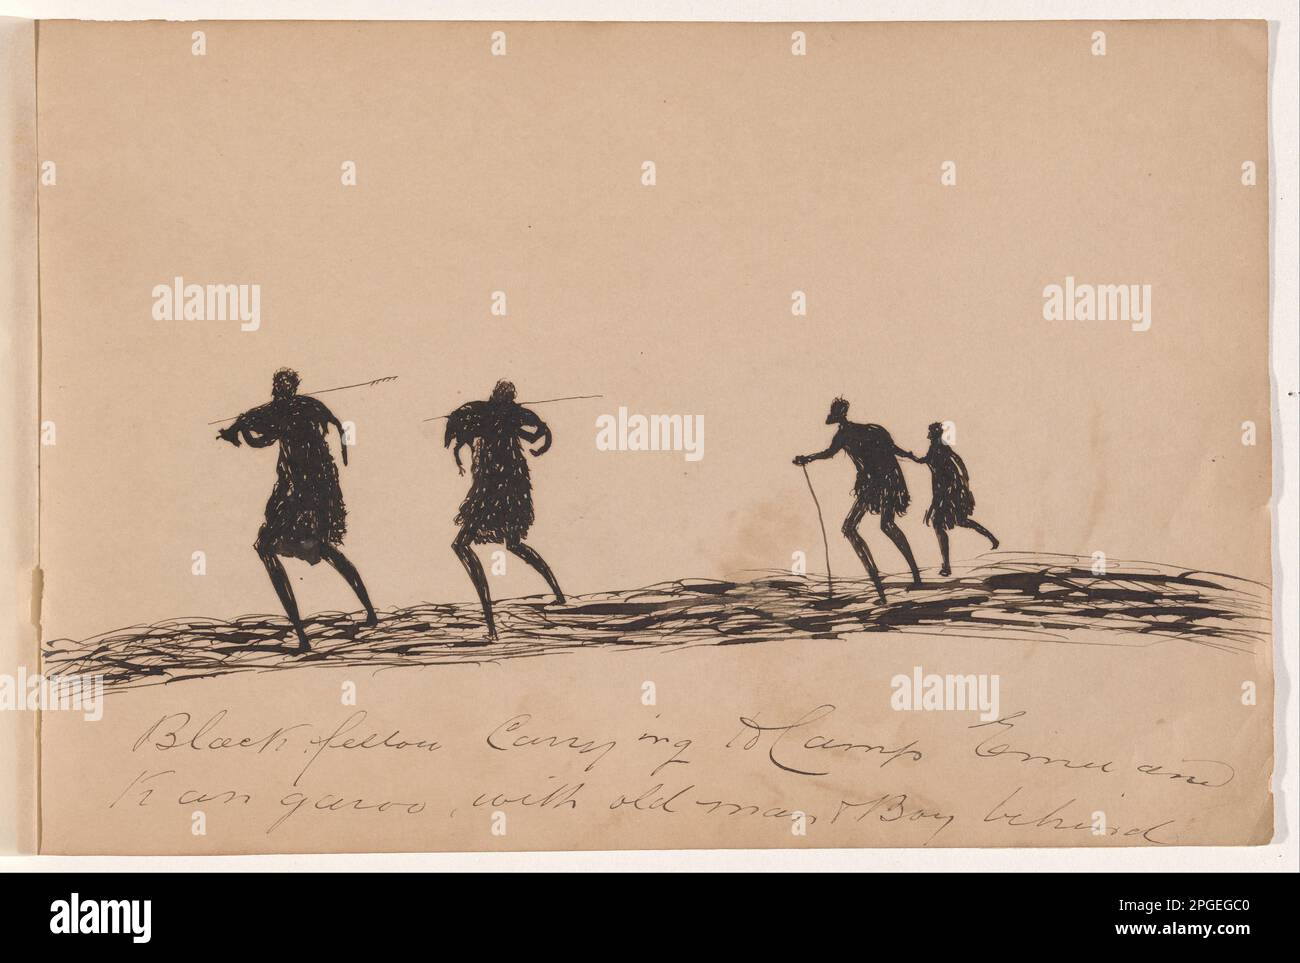 Black fellow carrying to camp emu and kangaroo with old man and boy behind-Sketchbook of Aboriginal activities c.1890s by Tommy McRae Stock Photo